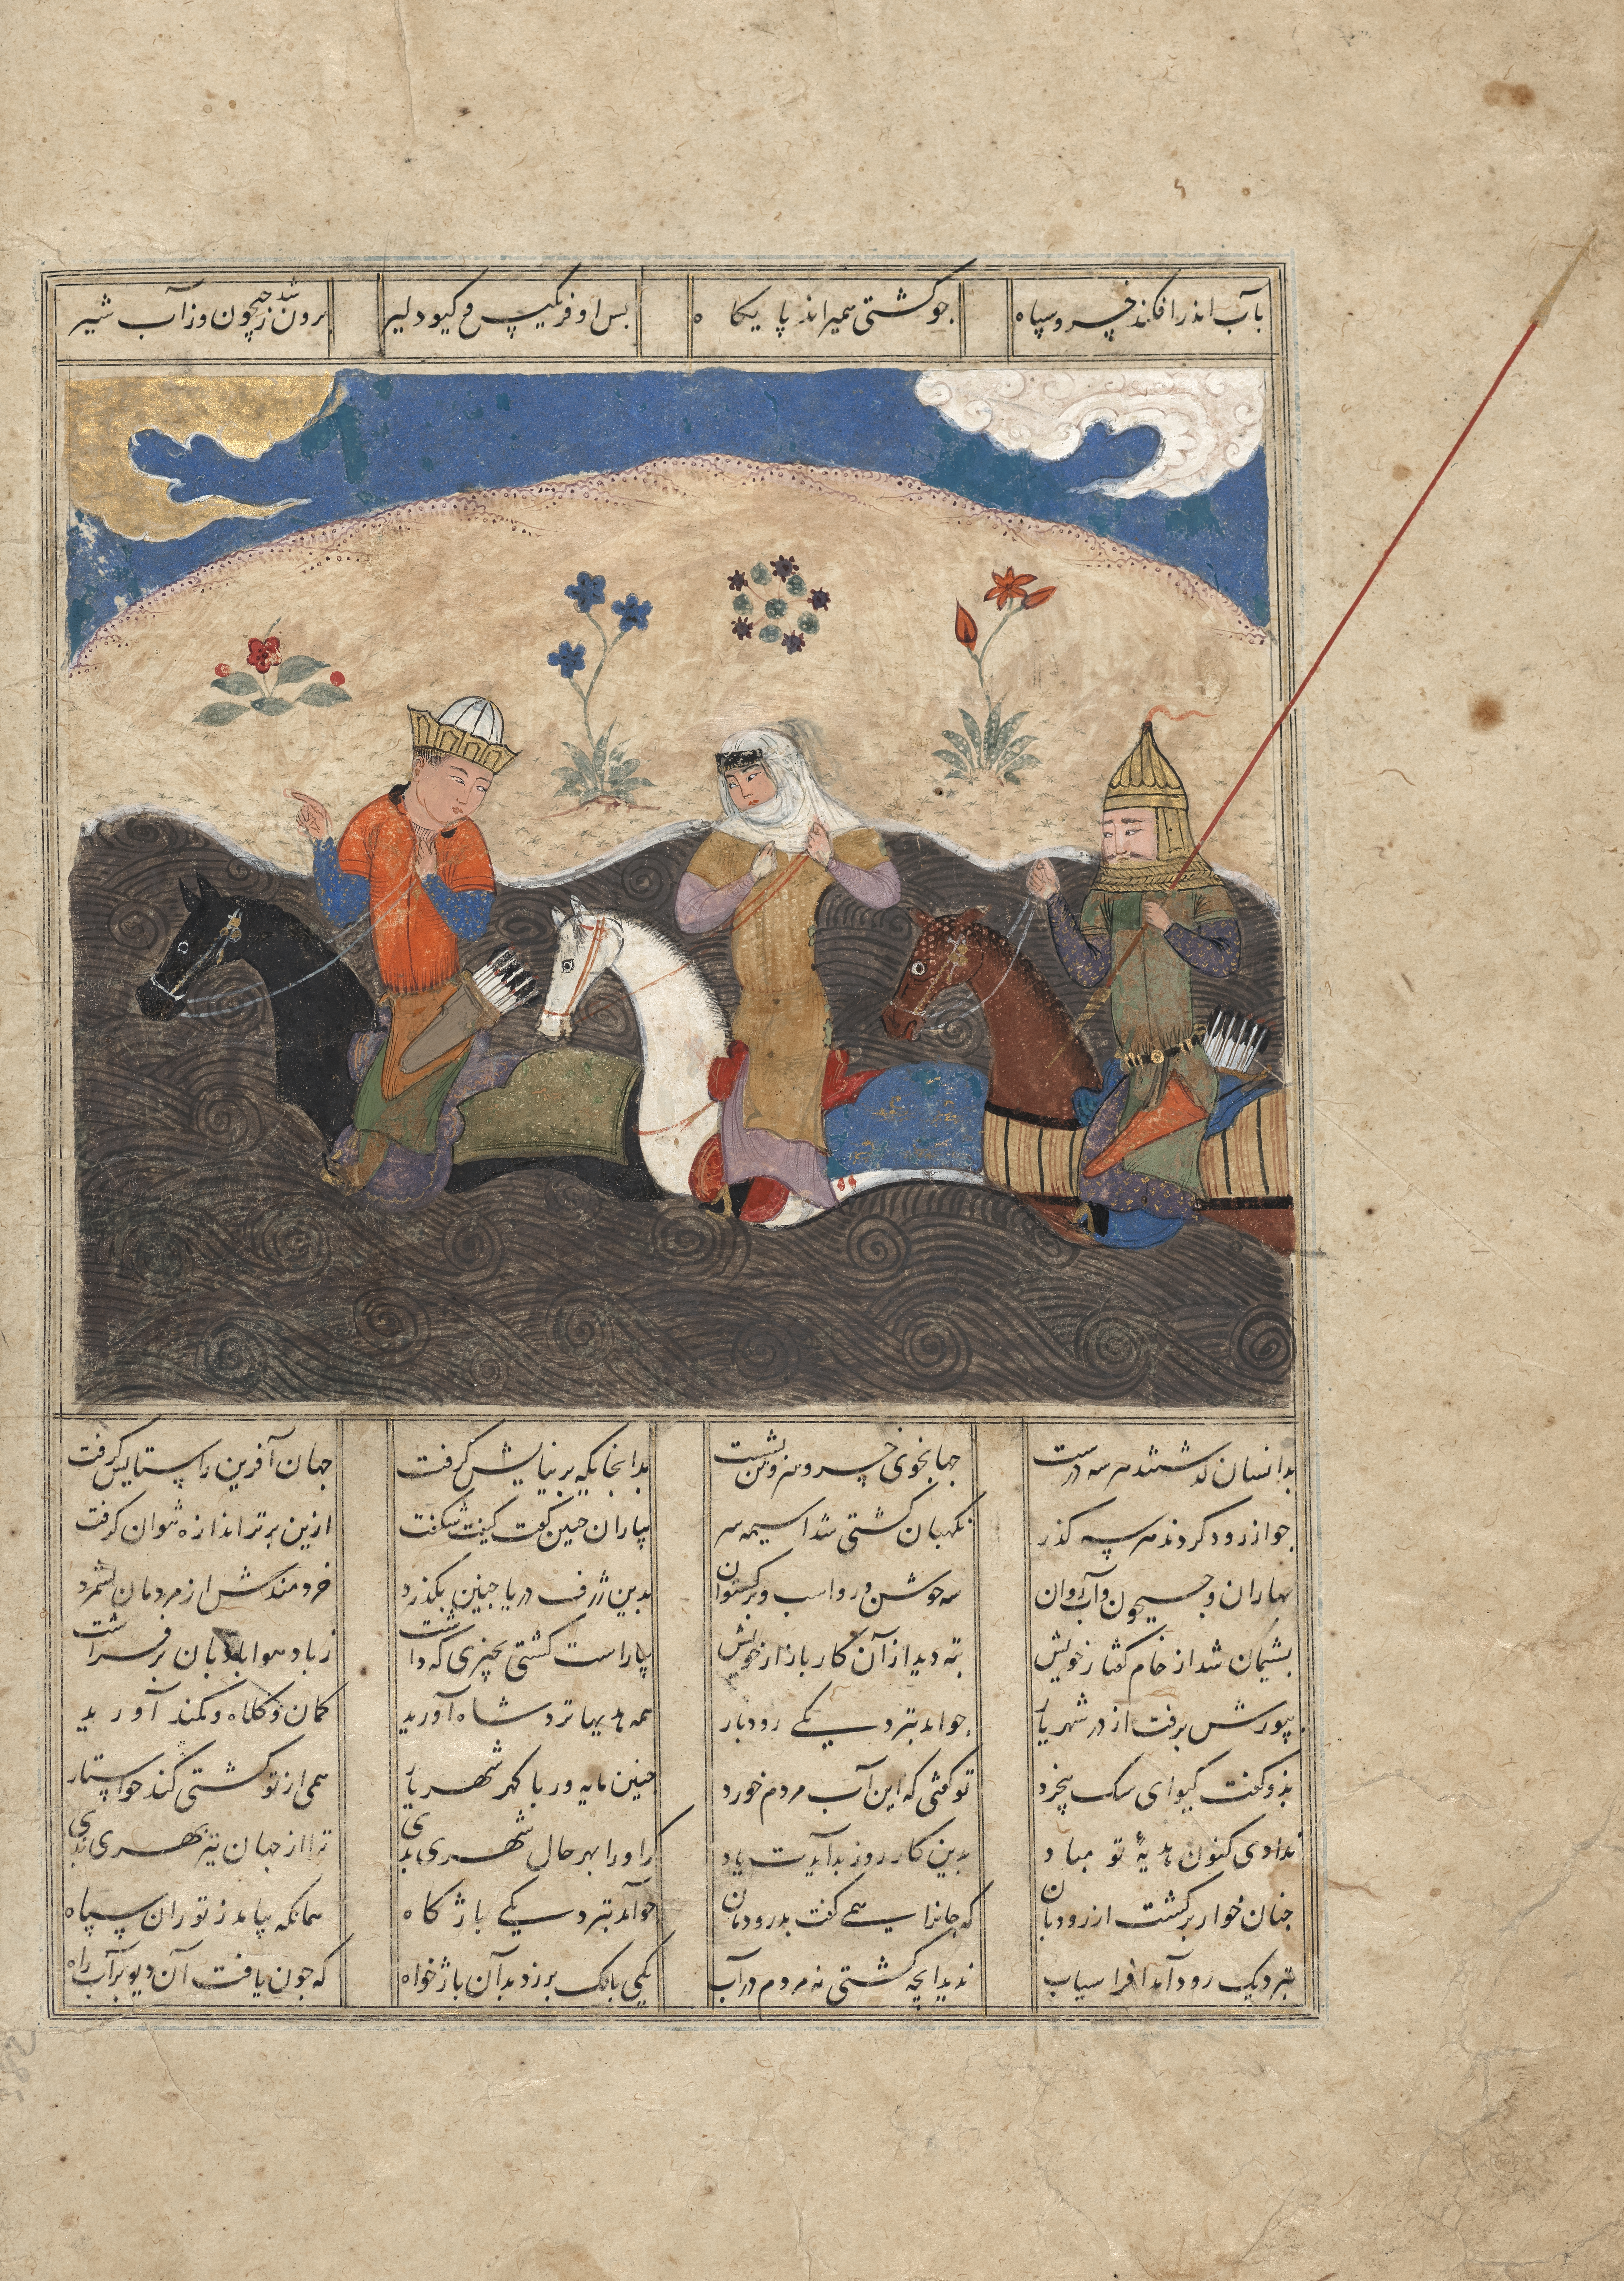 Painting of three men riding on horse in a stylized river with the script of another language around the page